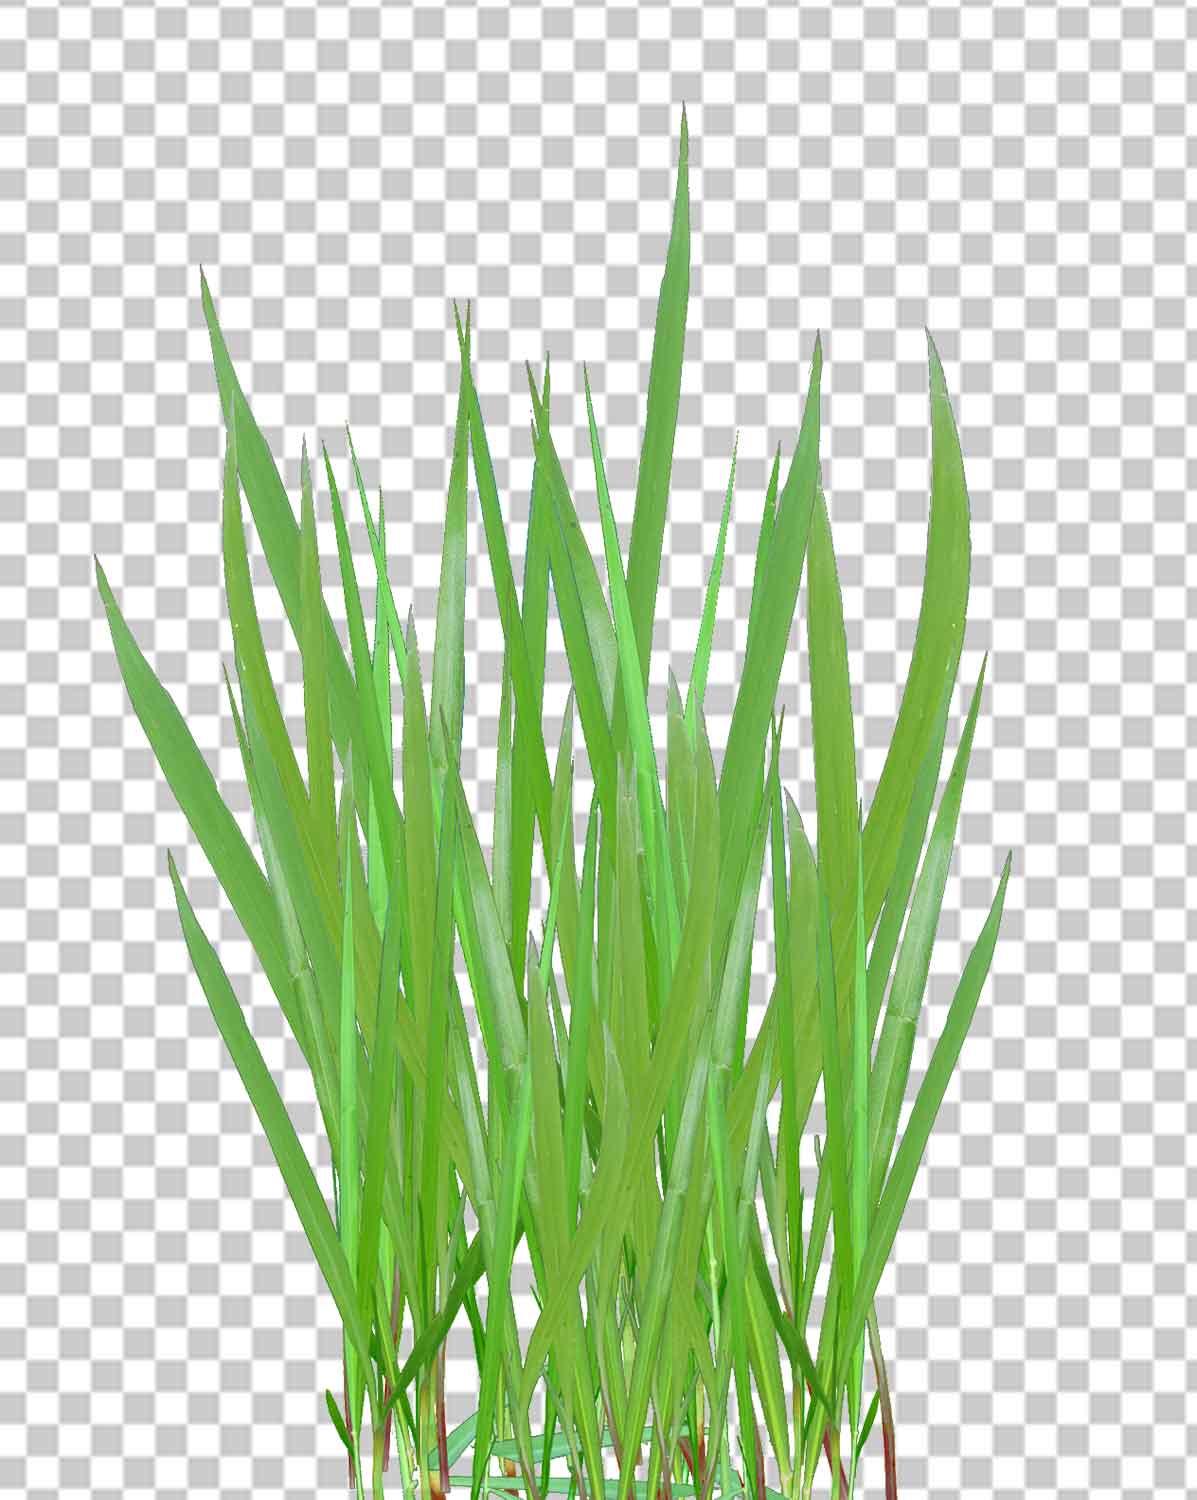 Green Grass Png Transparent Free Download Photo Free Download